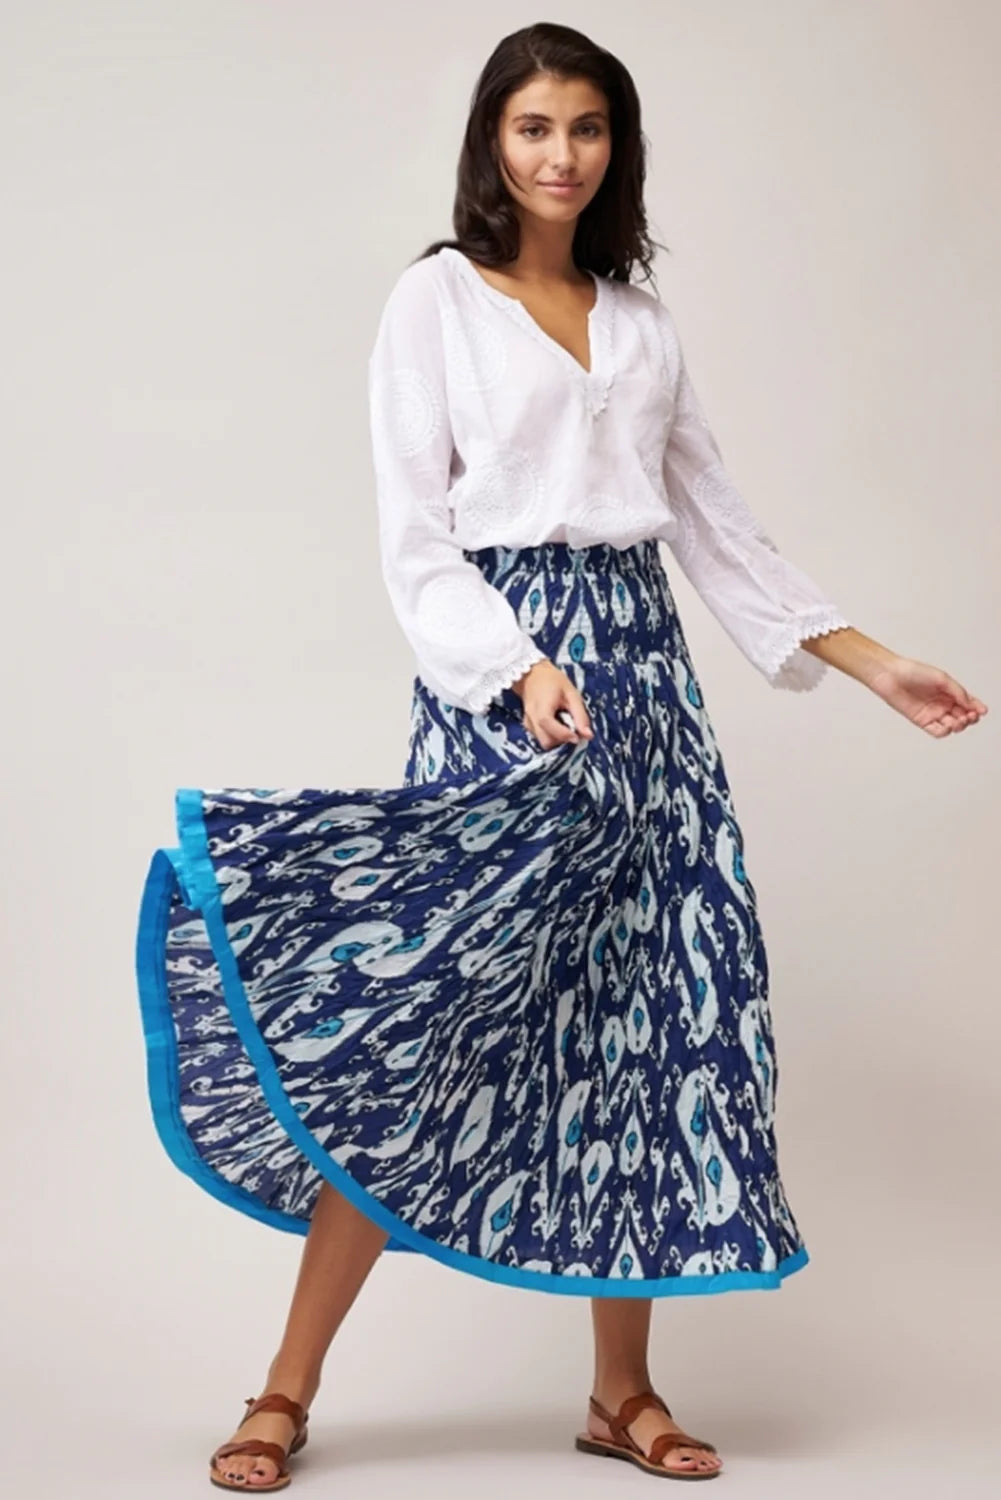 Mare Sole Amore Linen Layla Ikat Print Long Skirt | Ooh! Ooh! Shoes Women's  Clothing and Accessories Boutique